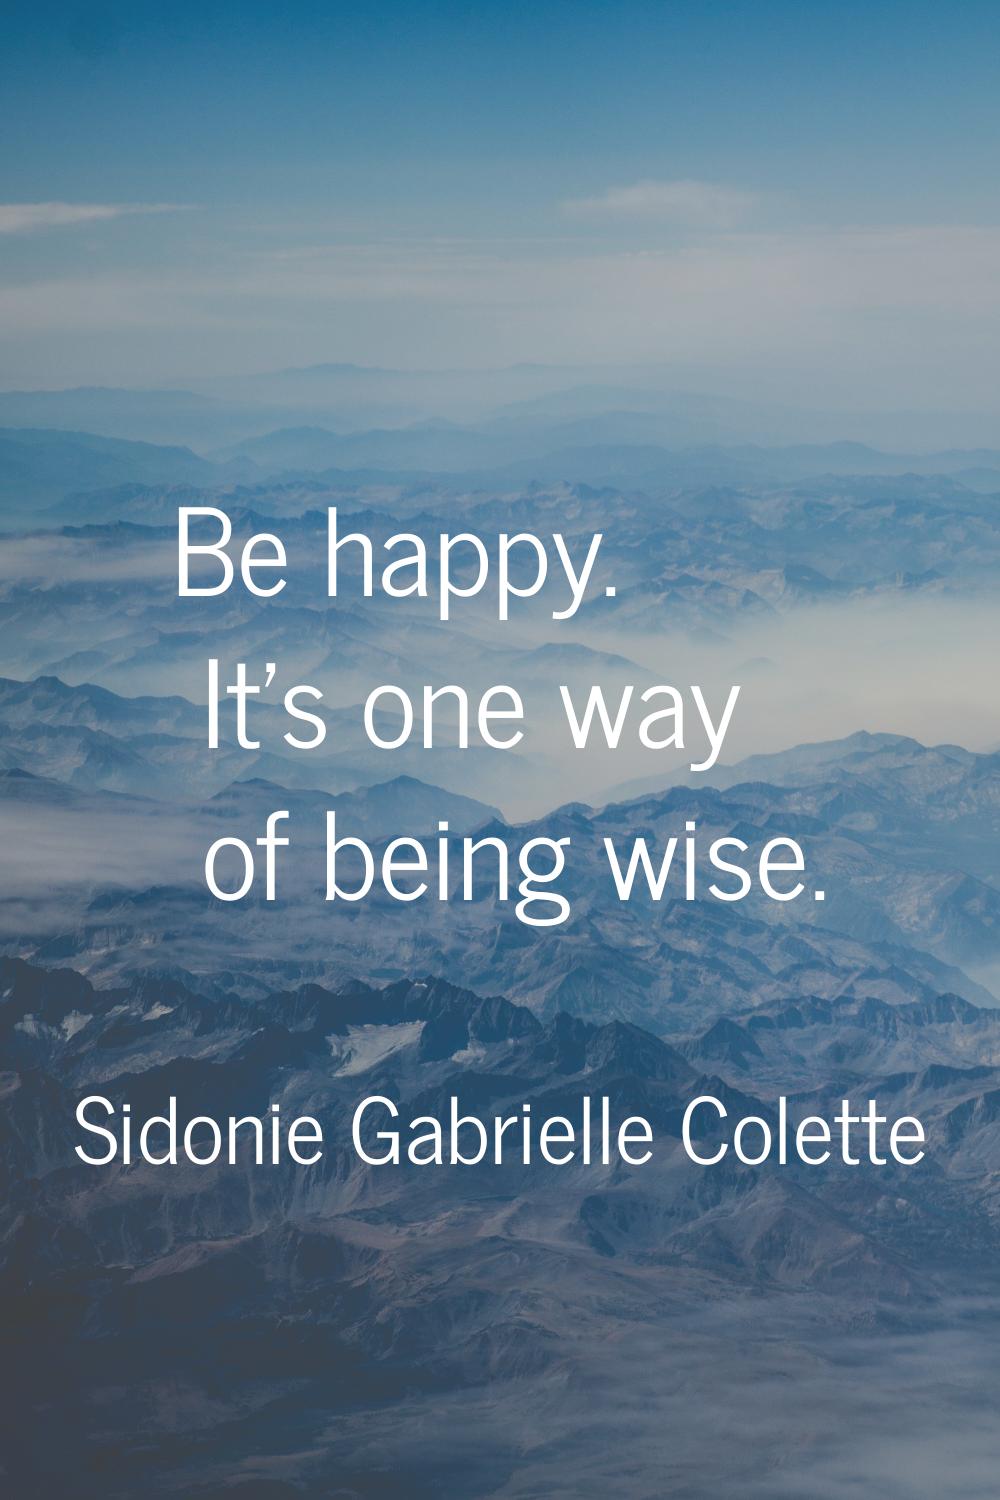 Be happy. It's one way of being wise.